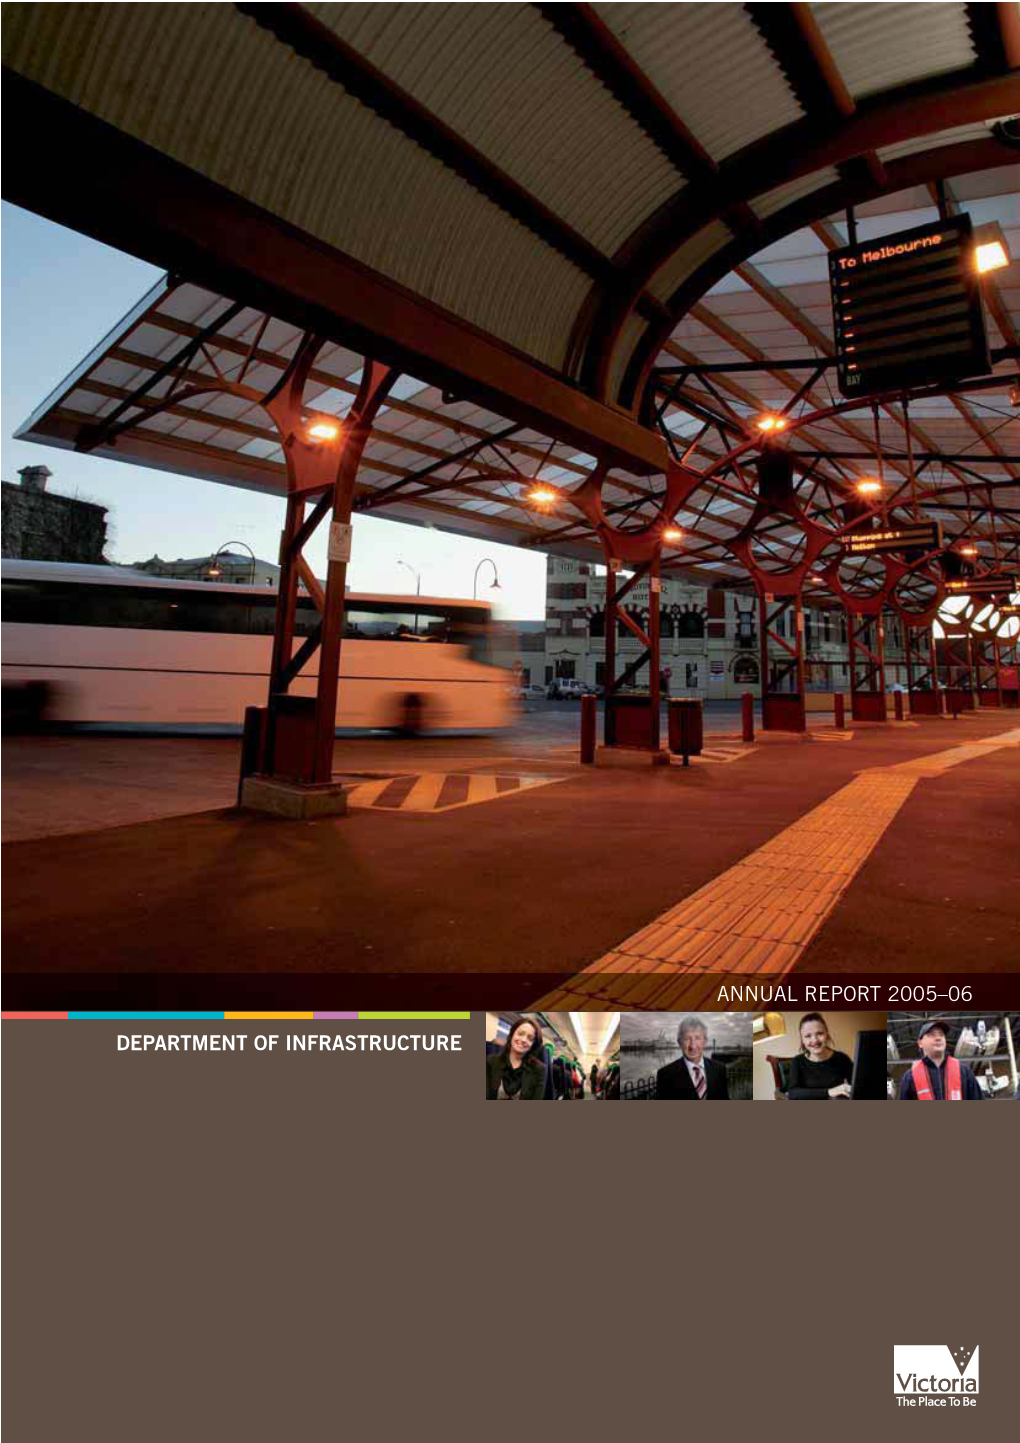 Department of Infrastructure Annual Report 2005-2006